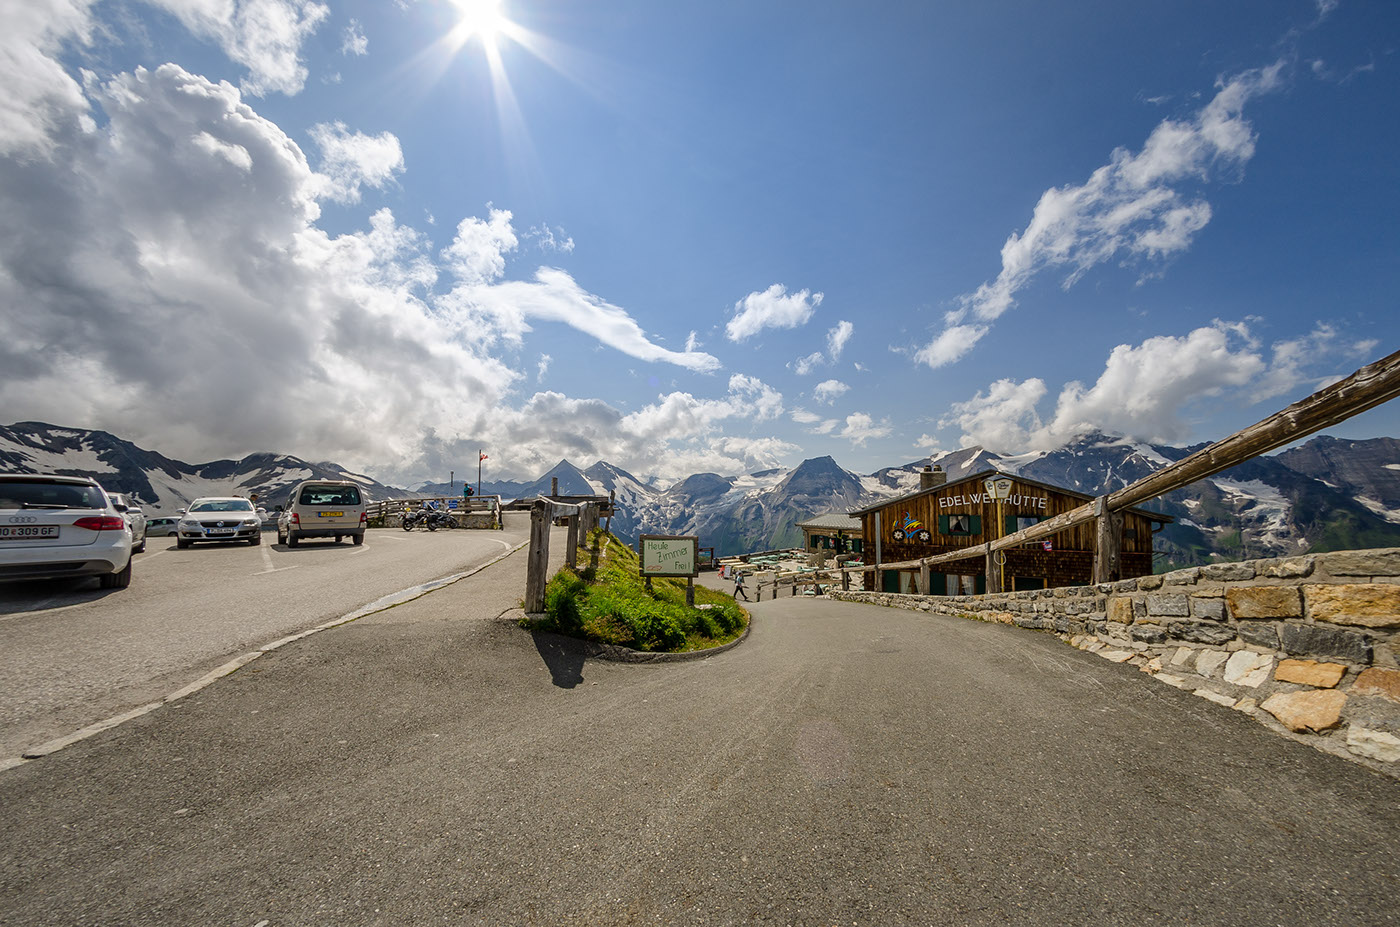 fish-eye grossglockner mountains road trip vacation places to visit Landscape Nature summer alpine road